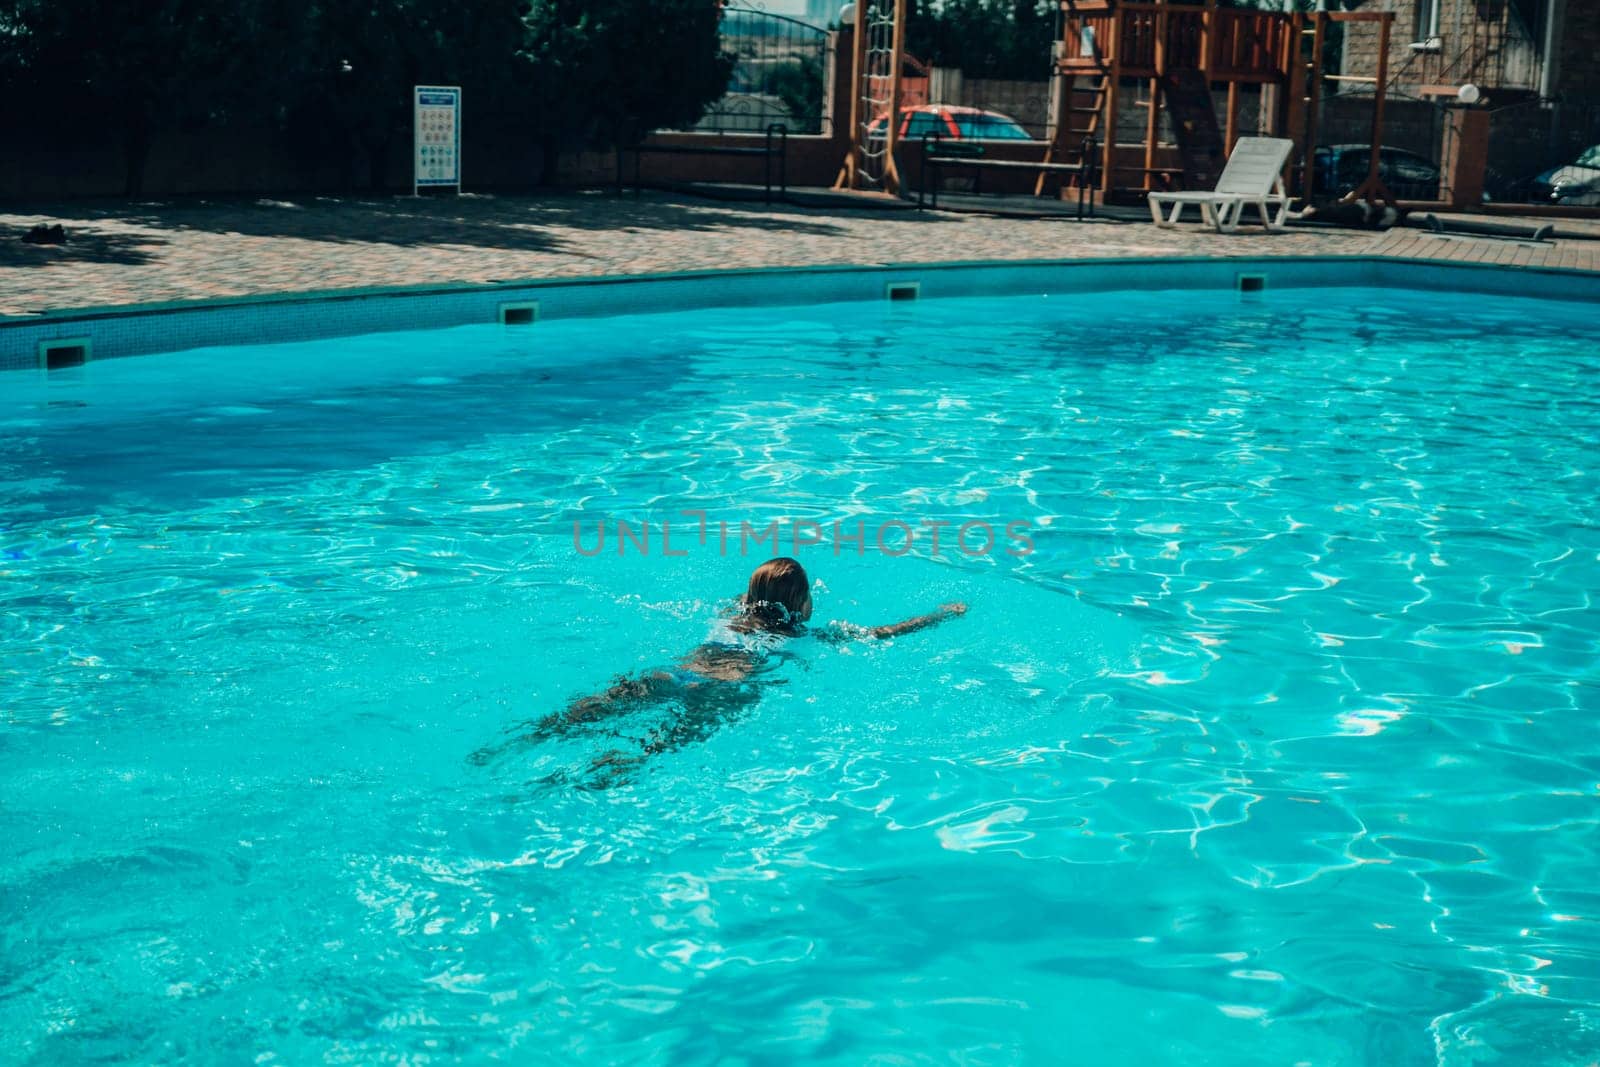 A woman is swimming in a pool. The water is clear and calm. The woman is wearing a black swimsuit